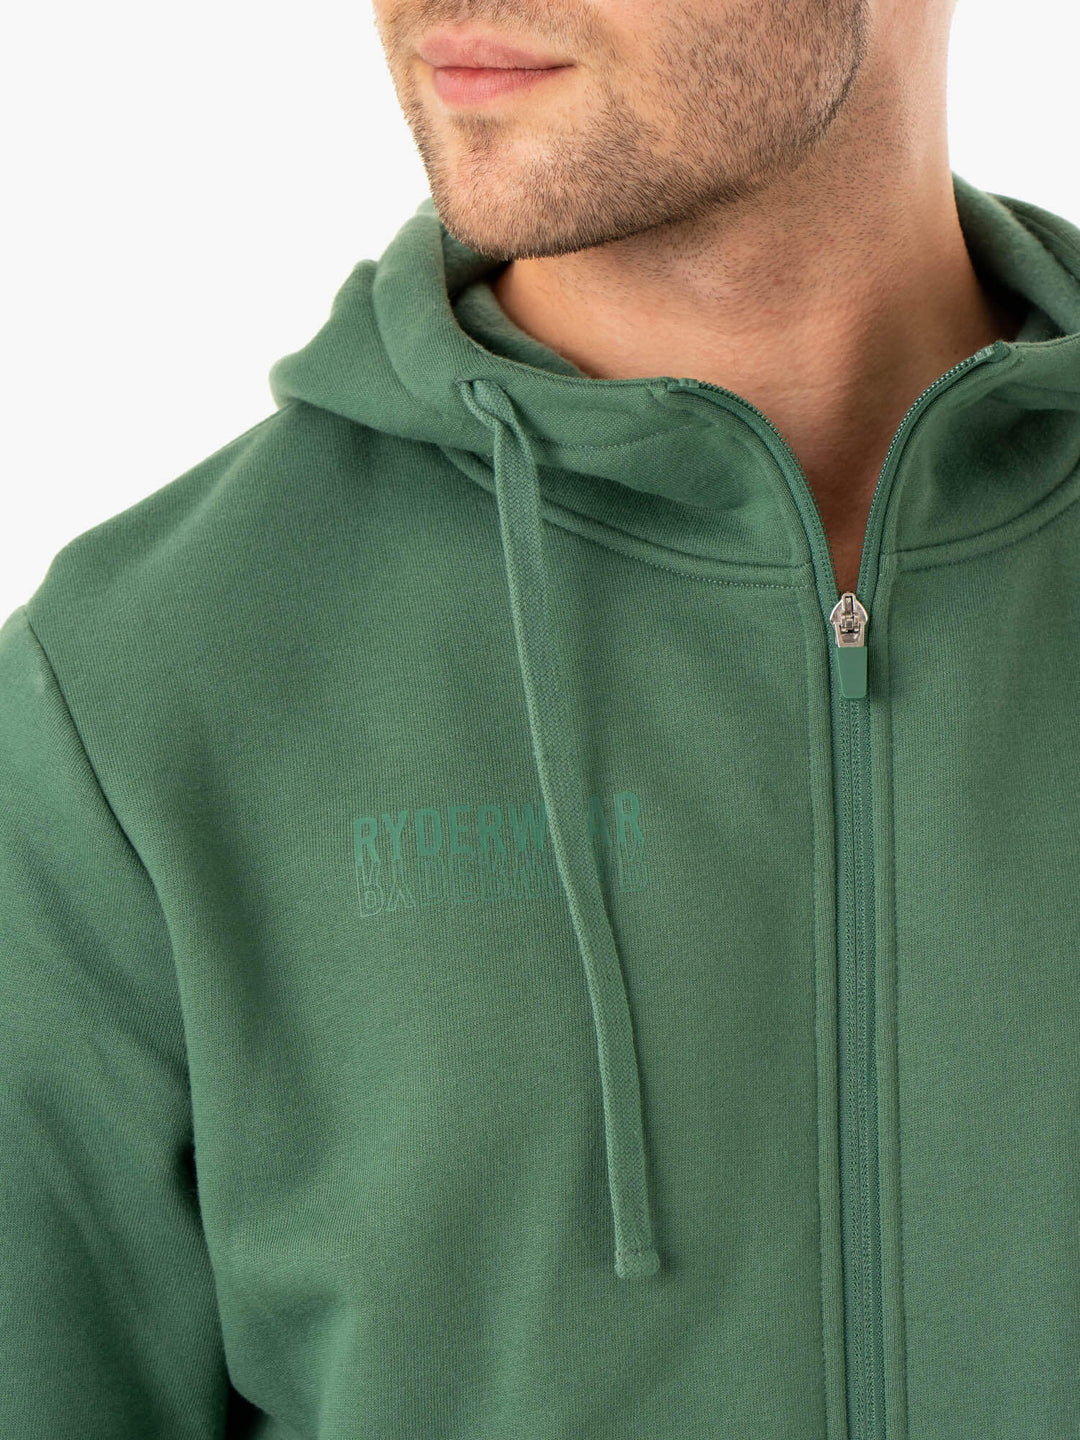 Limitless Zip Up Jacket - Forest Green Clothing Ryderwear 